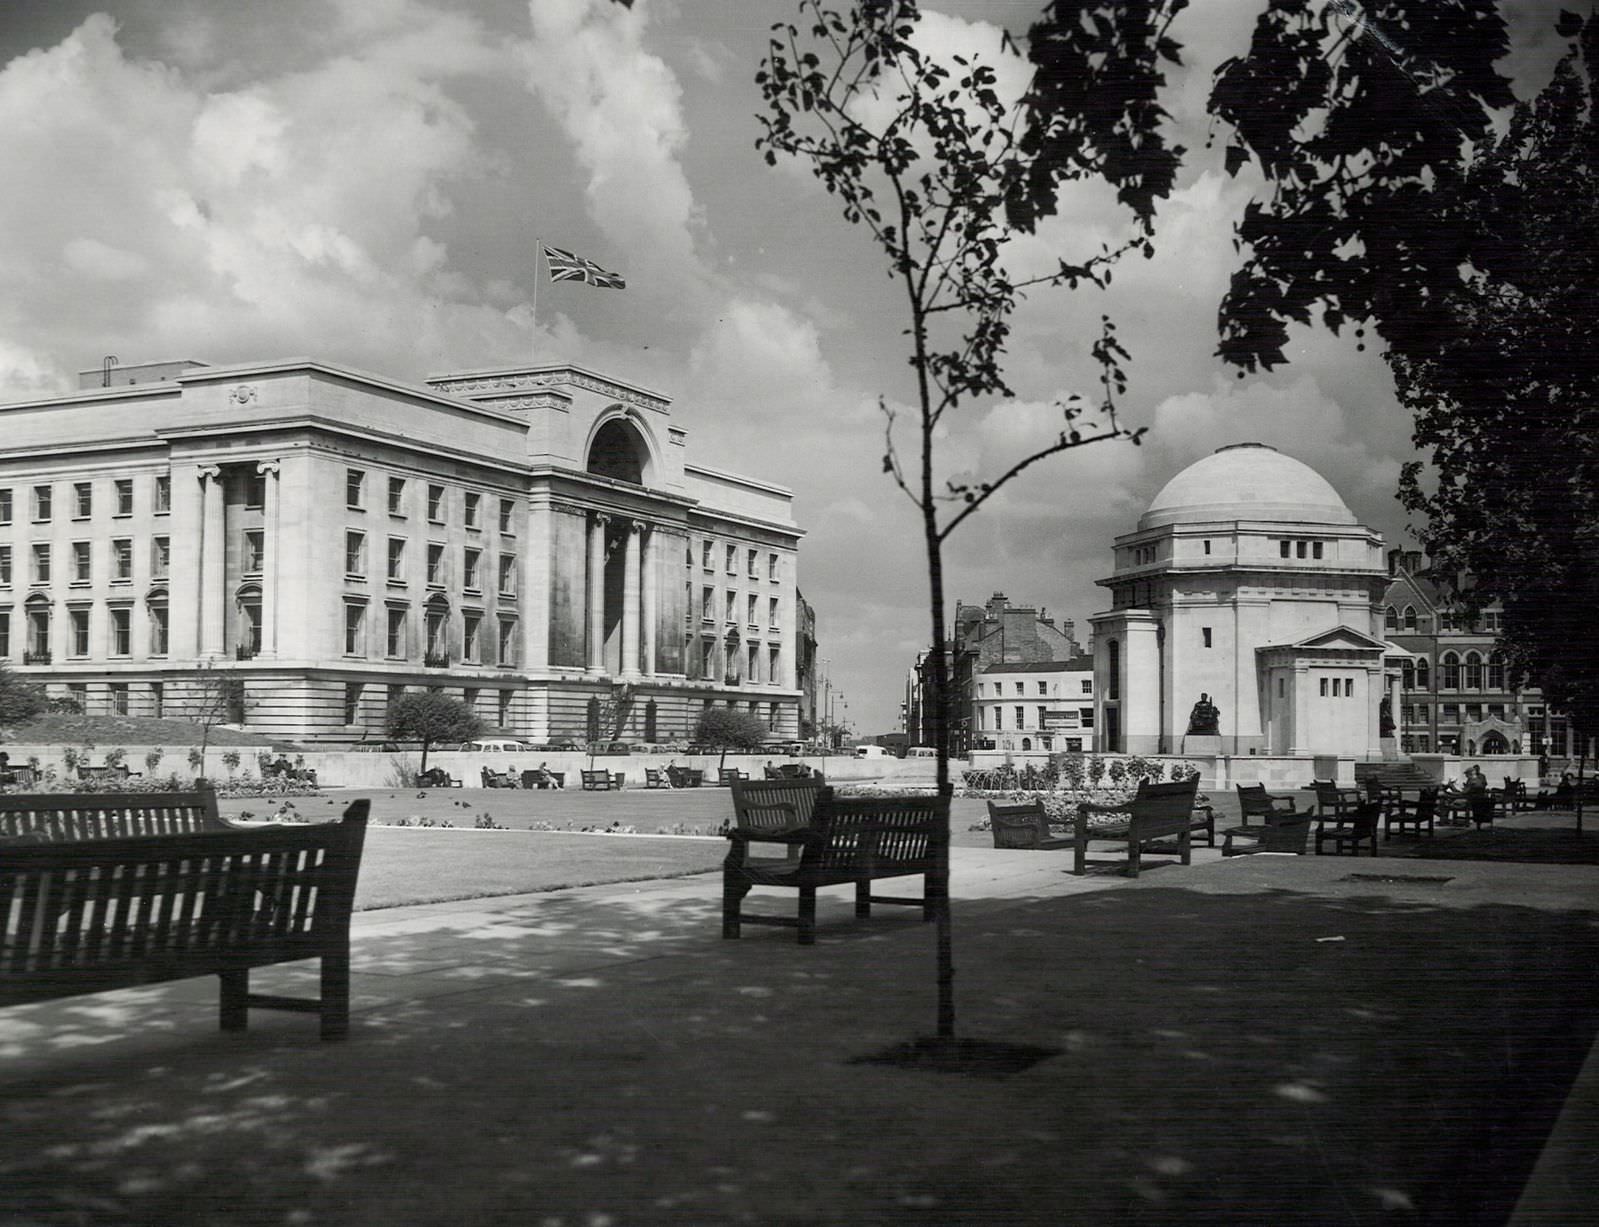 Union Jack flying over Baskerville House, overlooking the Hall of Memory in Birmingham City Centre, August 1961.